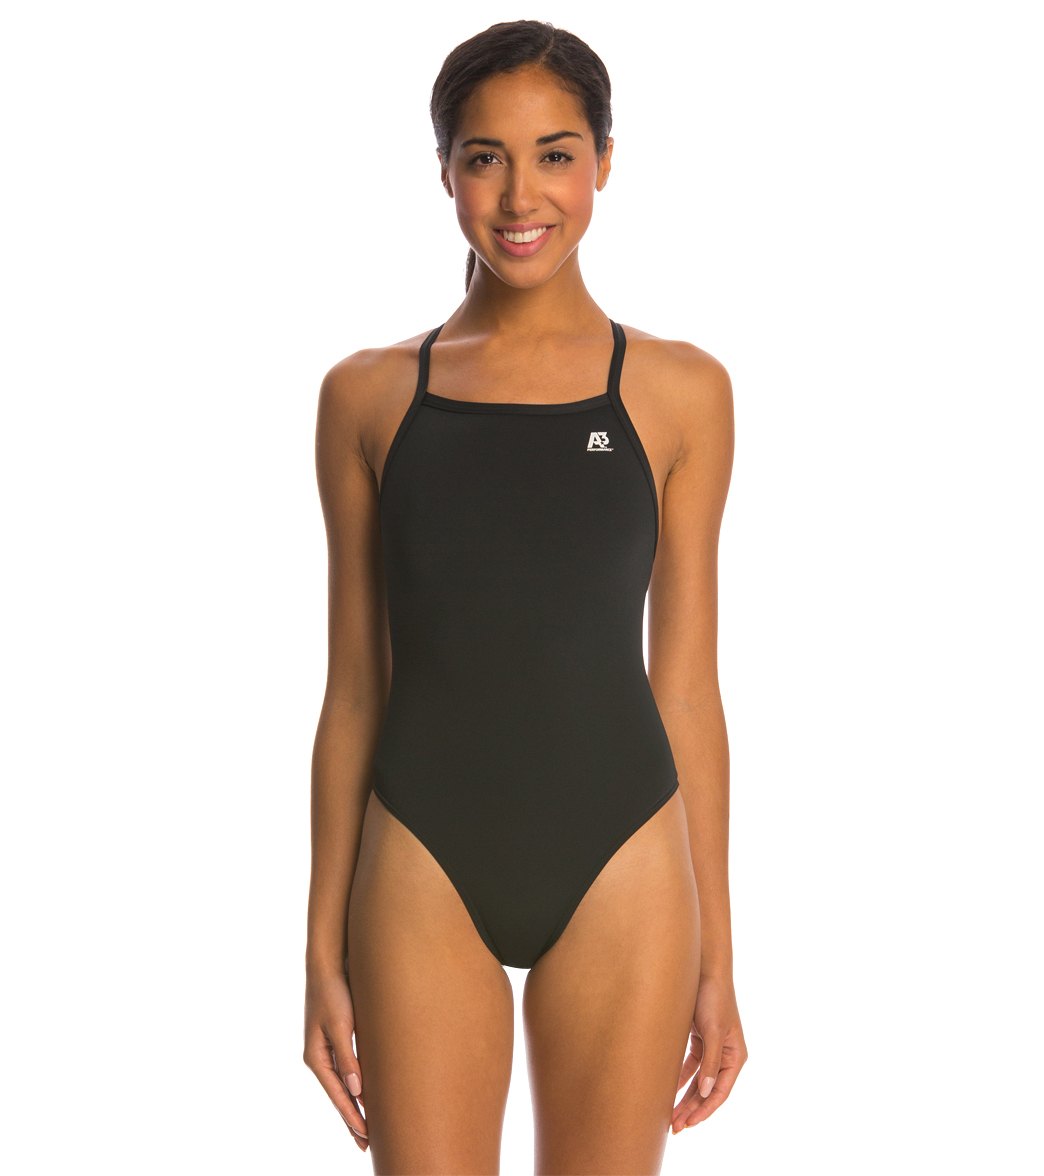 A3 Performance Female X-Back Solid Poly One Piece Swimsuit - Black 28 Polyester/Pbt - Swimoutlet.com